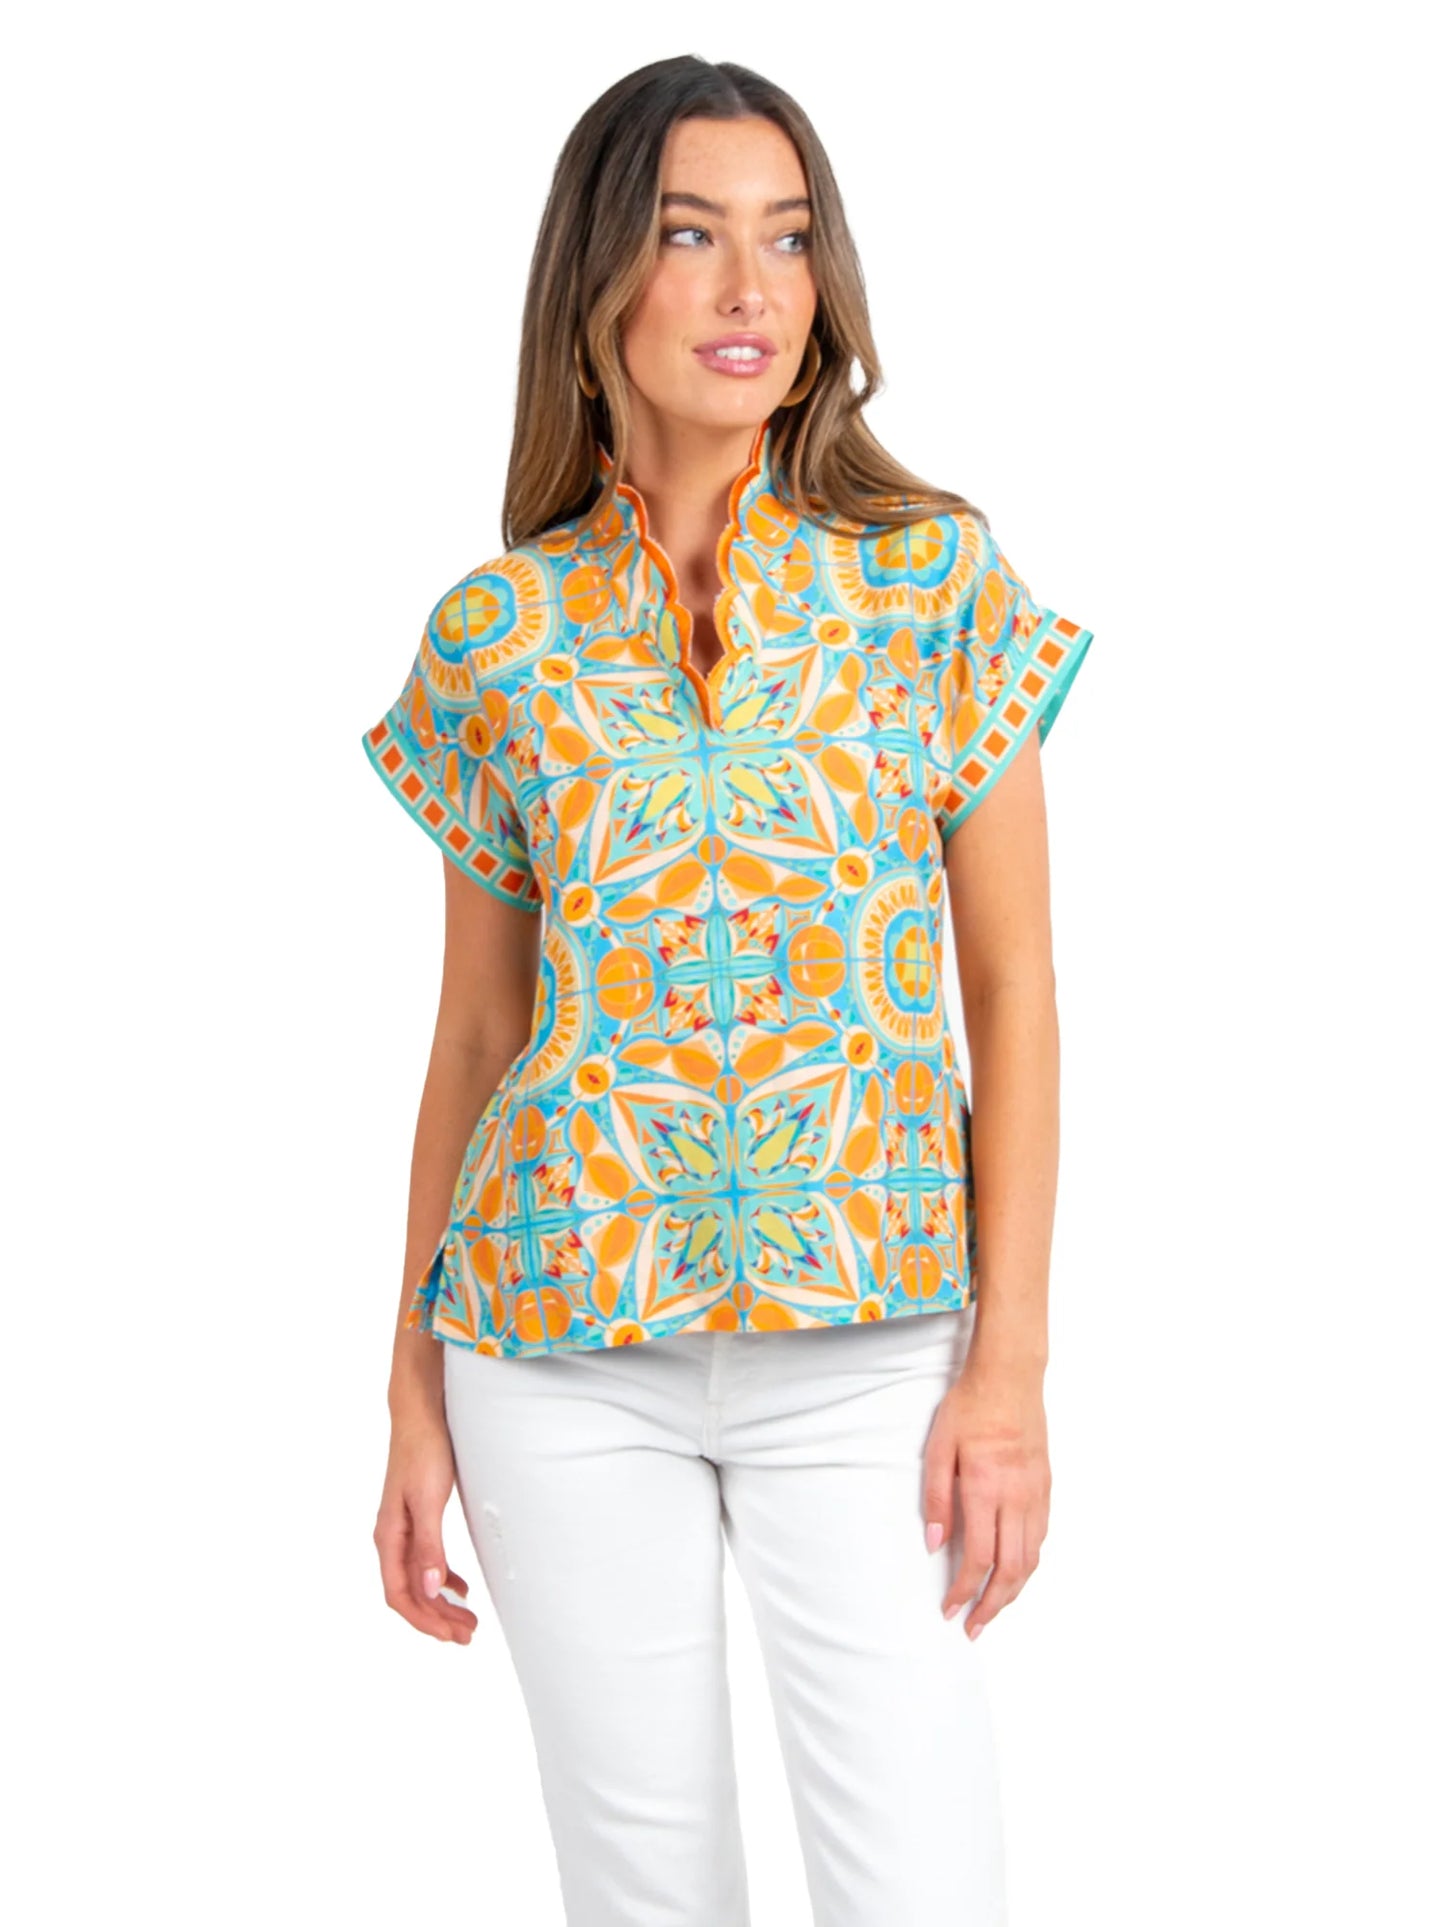 Emily McCarthy Orchid Top in Poolside